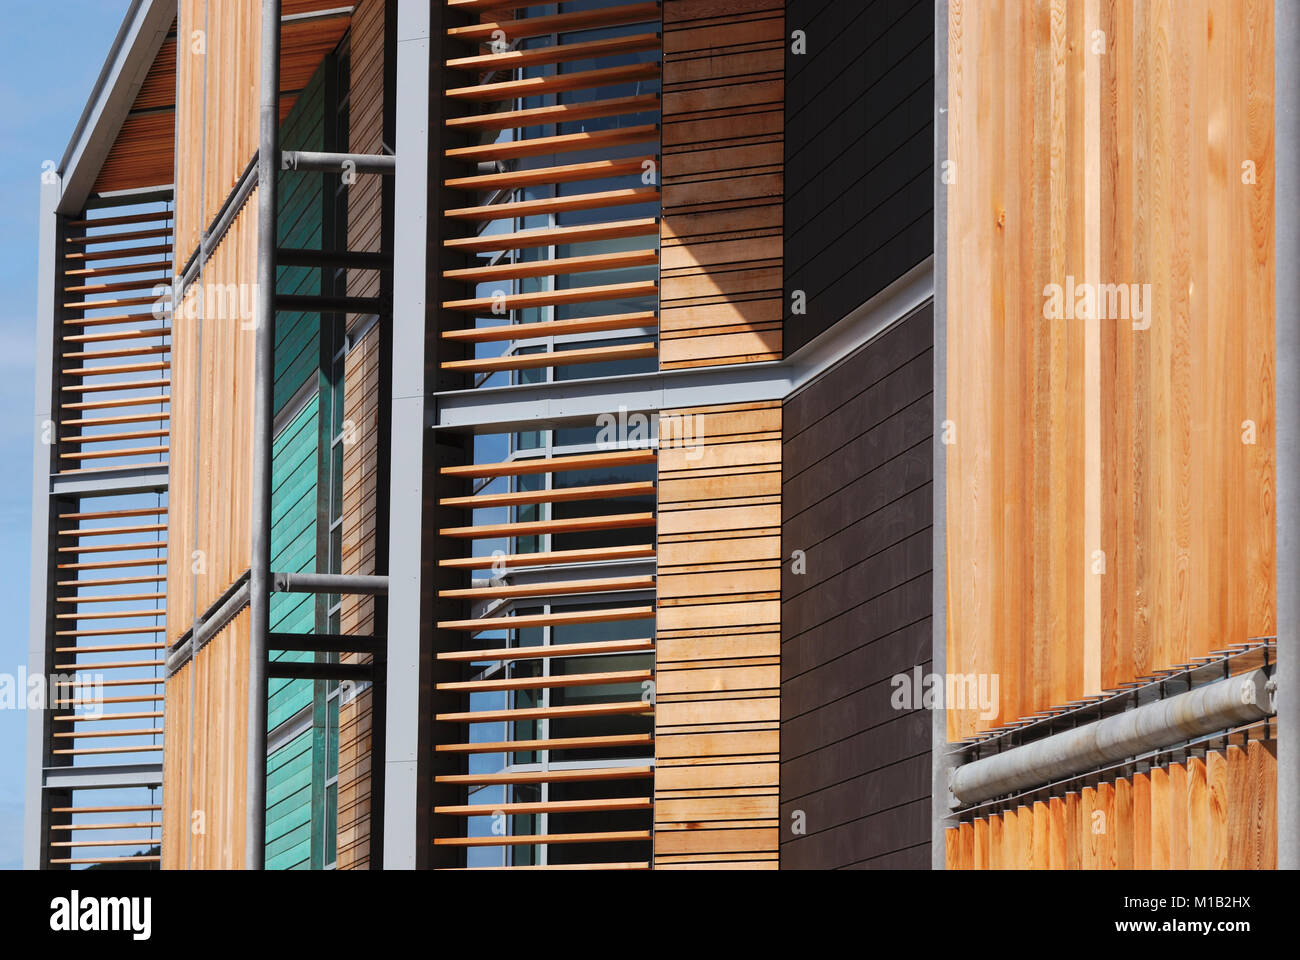 Steel and timber, wood architecture, The Welsh Assembly building, Aberystwyth, Wales, UK. Stock Photo